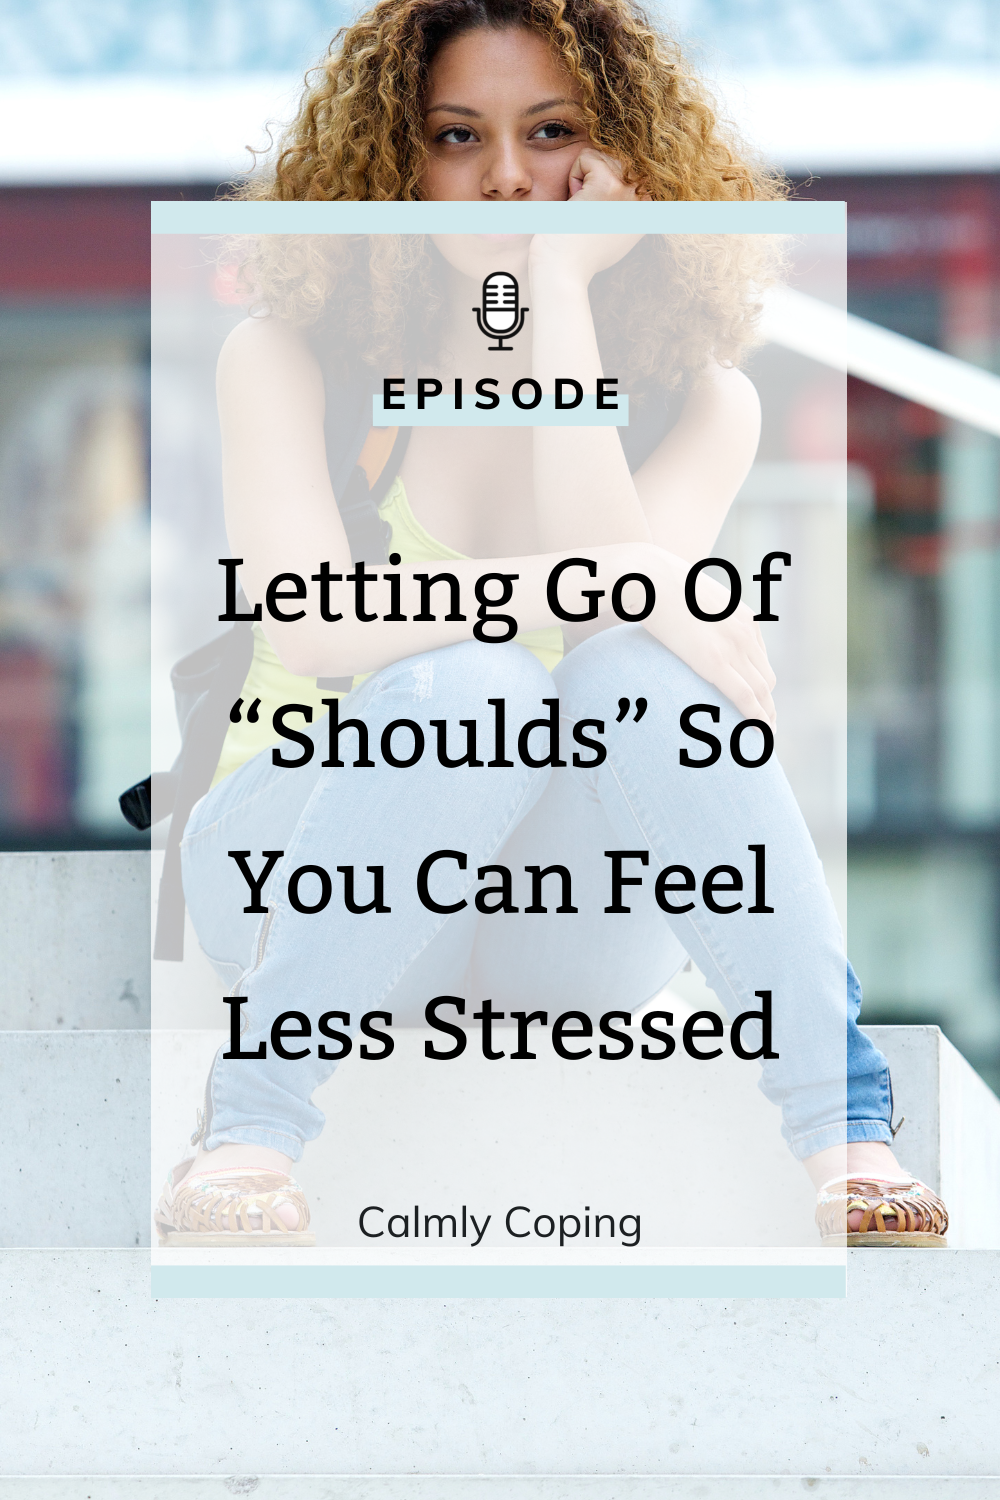 Letting Go Of “Shoulds” So You Can Feel Less Stressed